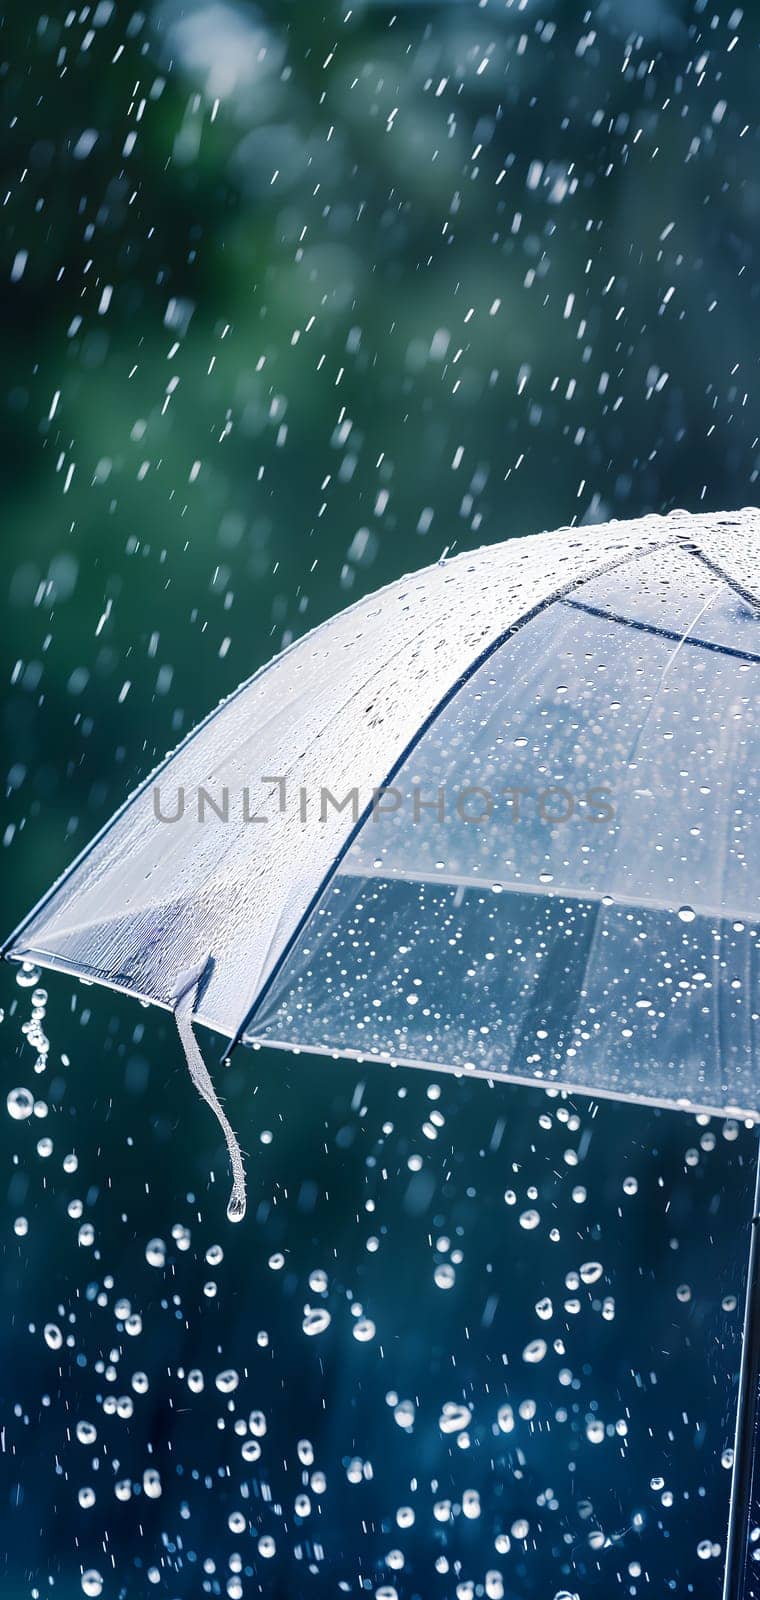 Close up, transparent umbrella under rainfall against a background of water droplets splashing. Concept of rainy weather. Neural network generated image. Not based on any actual scene or pattern.